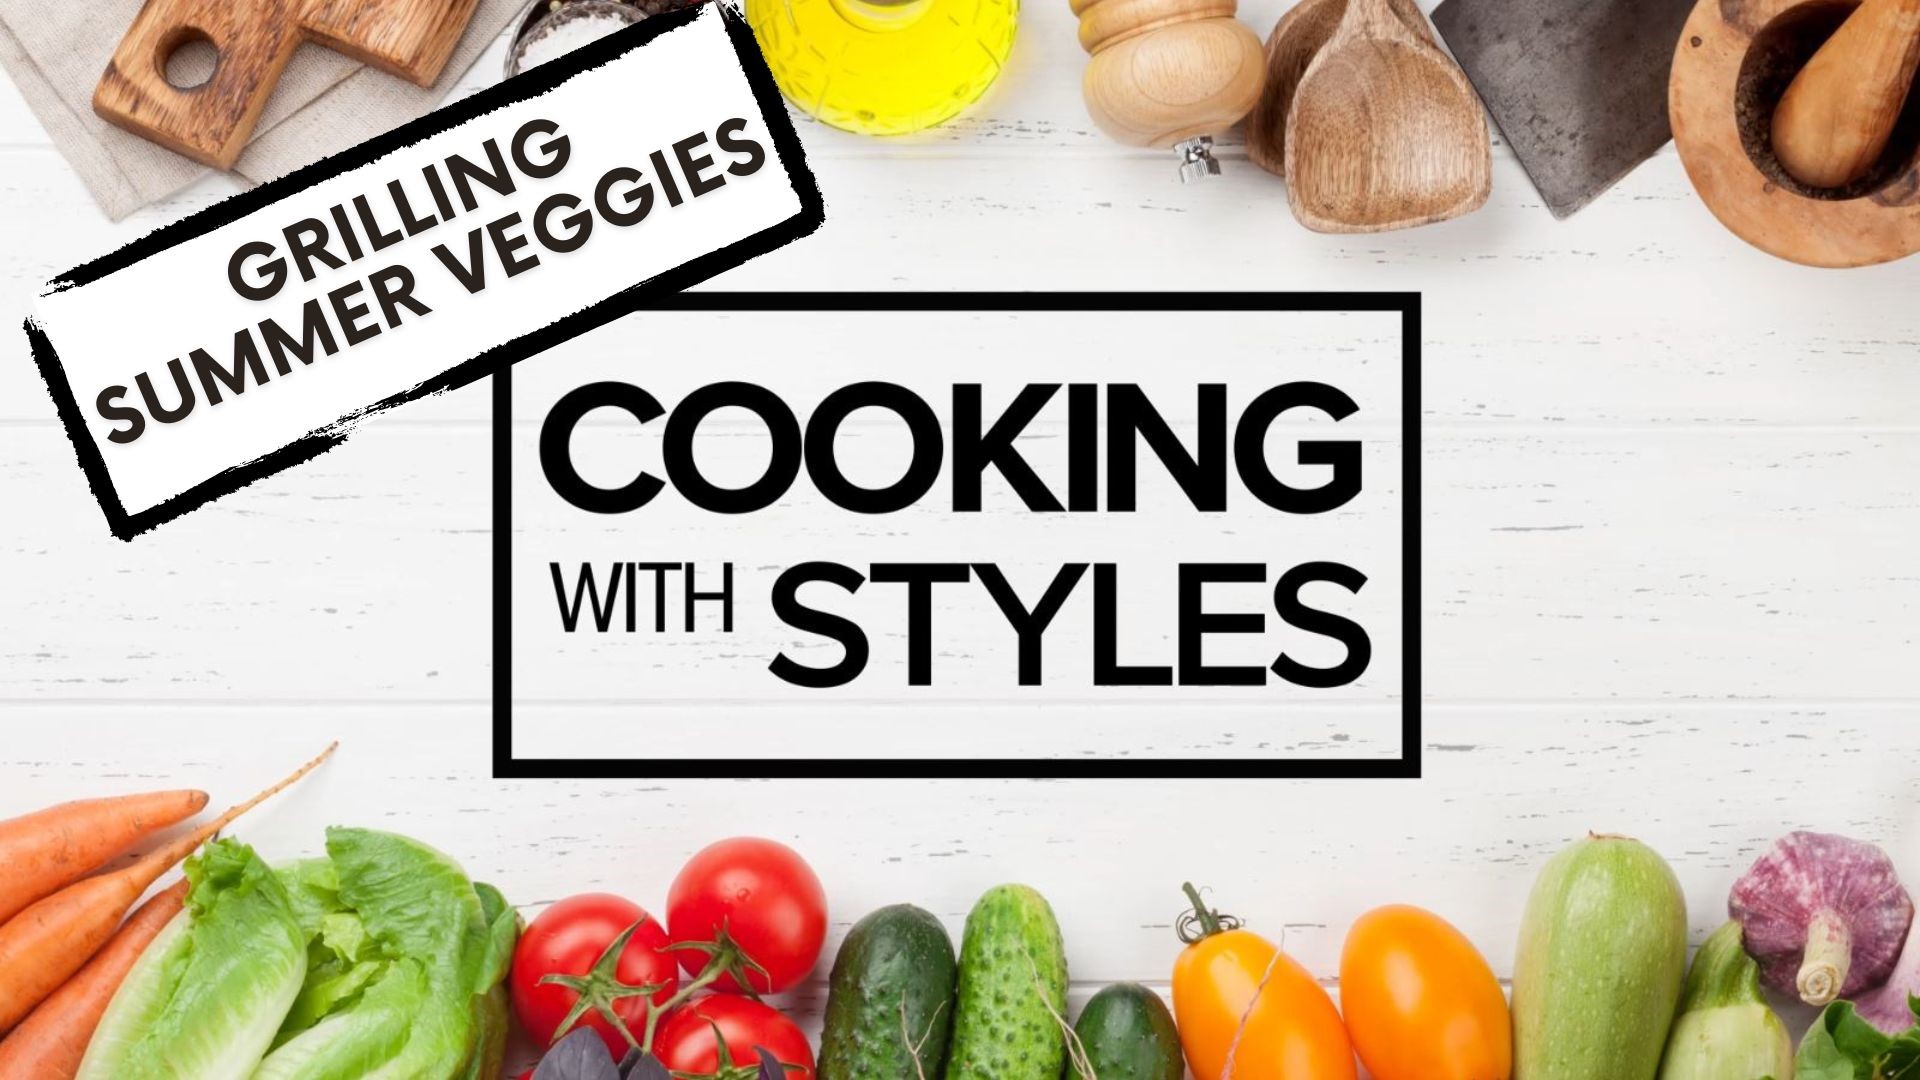 Shawn Styles shares his tips to making delicious veggies on the grill. From cauliflower steaks to corn salad, veggie kabobs and more, Shawn has you covered.